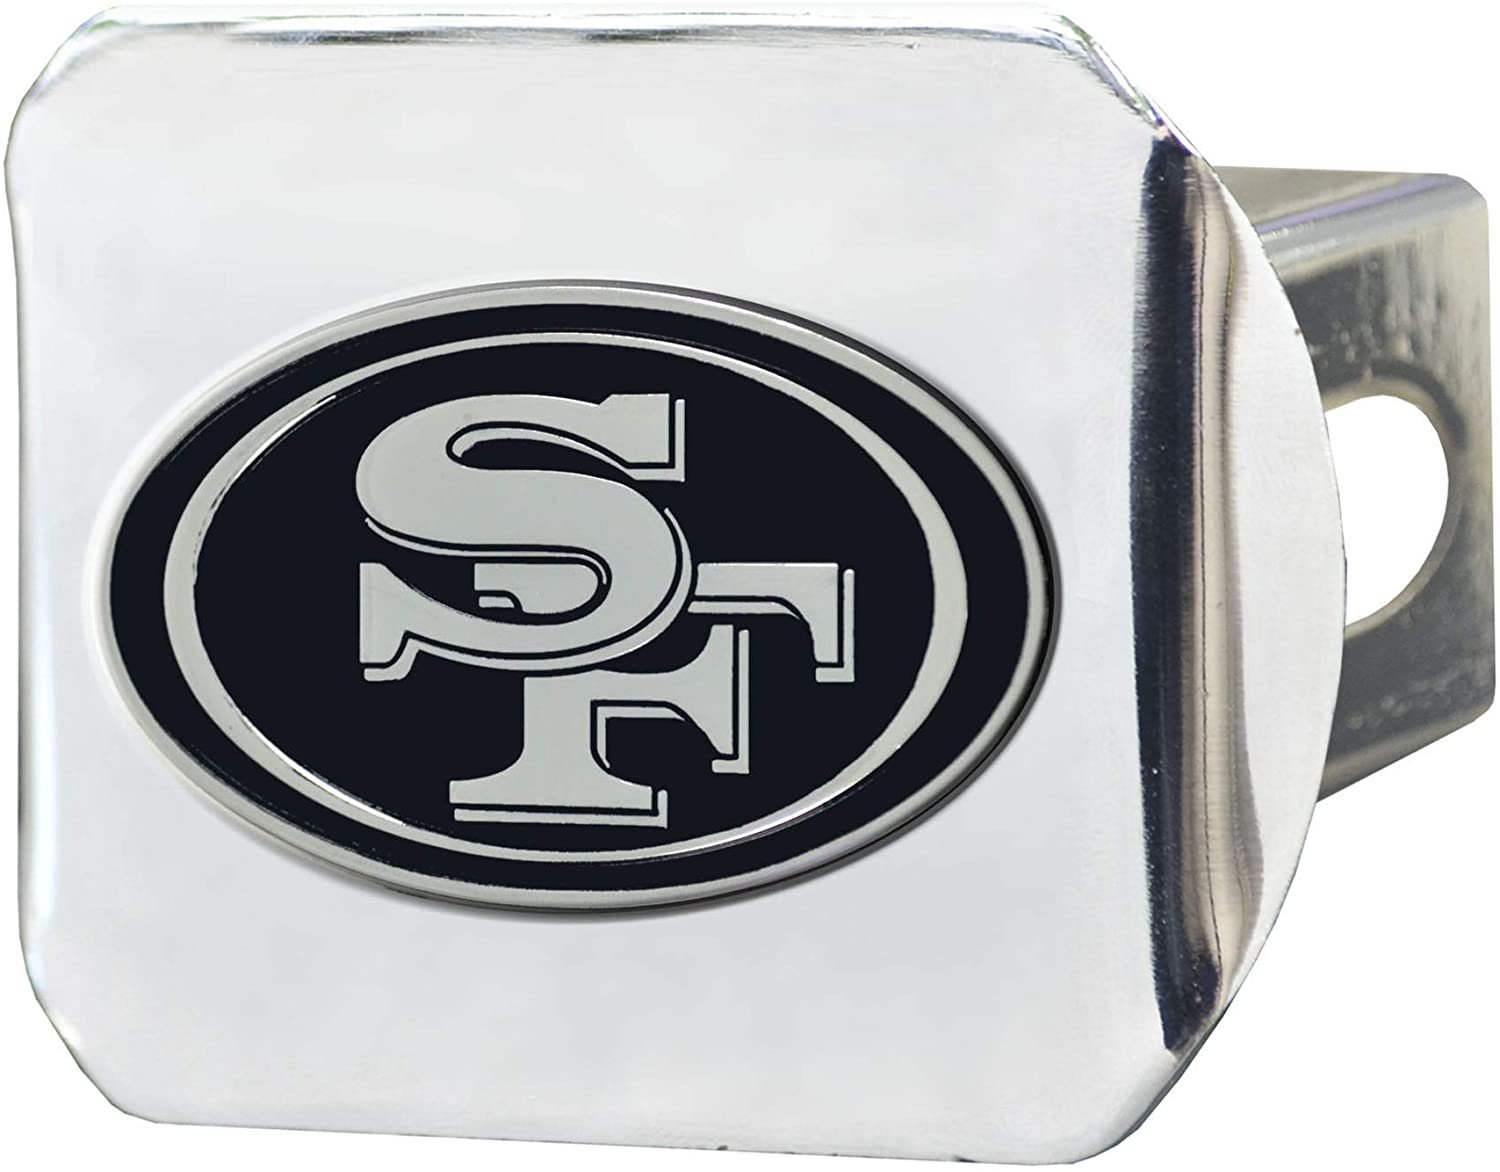 San Francisco 49ers Solid Metal Hitch Cover with Chrome Metal Emblem 2 Inch Square Type III